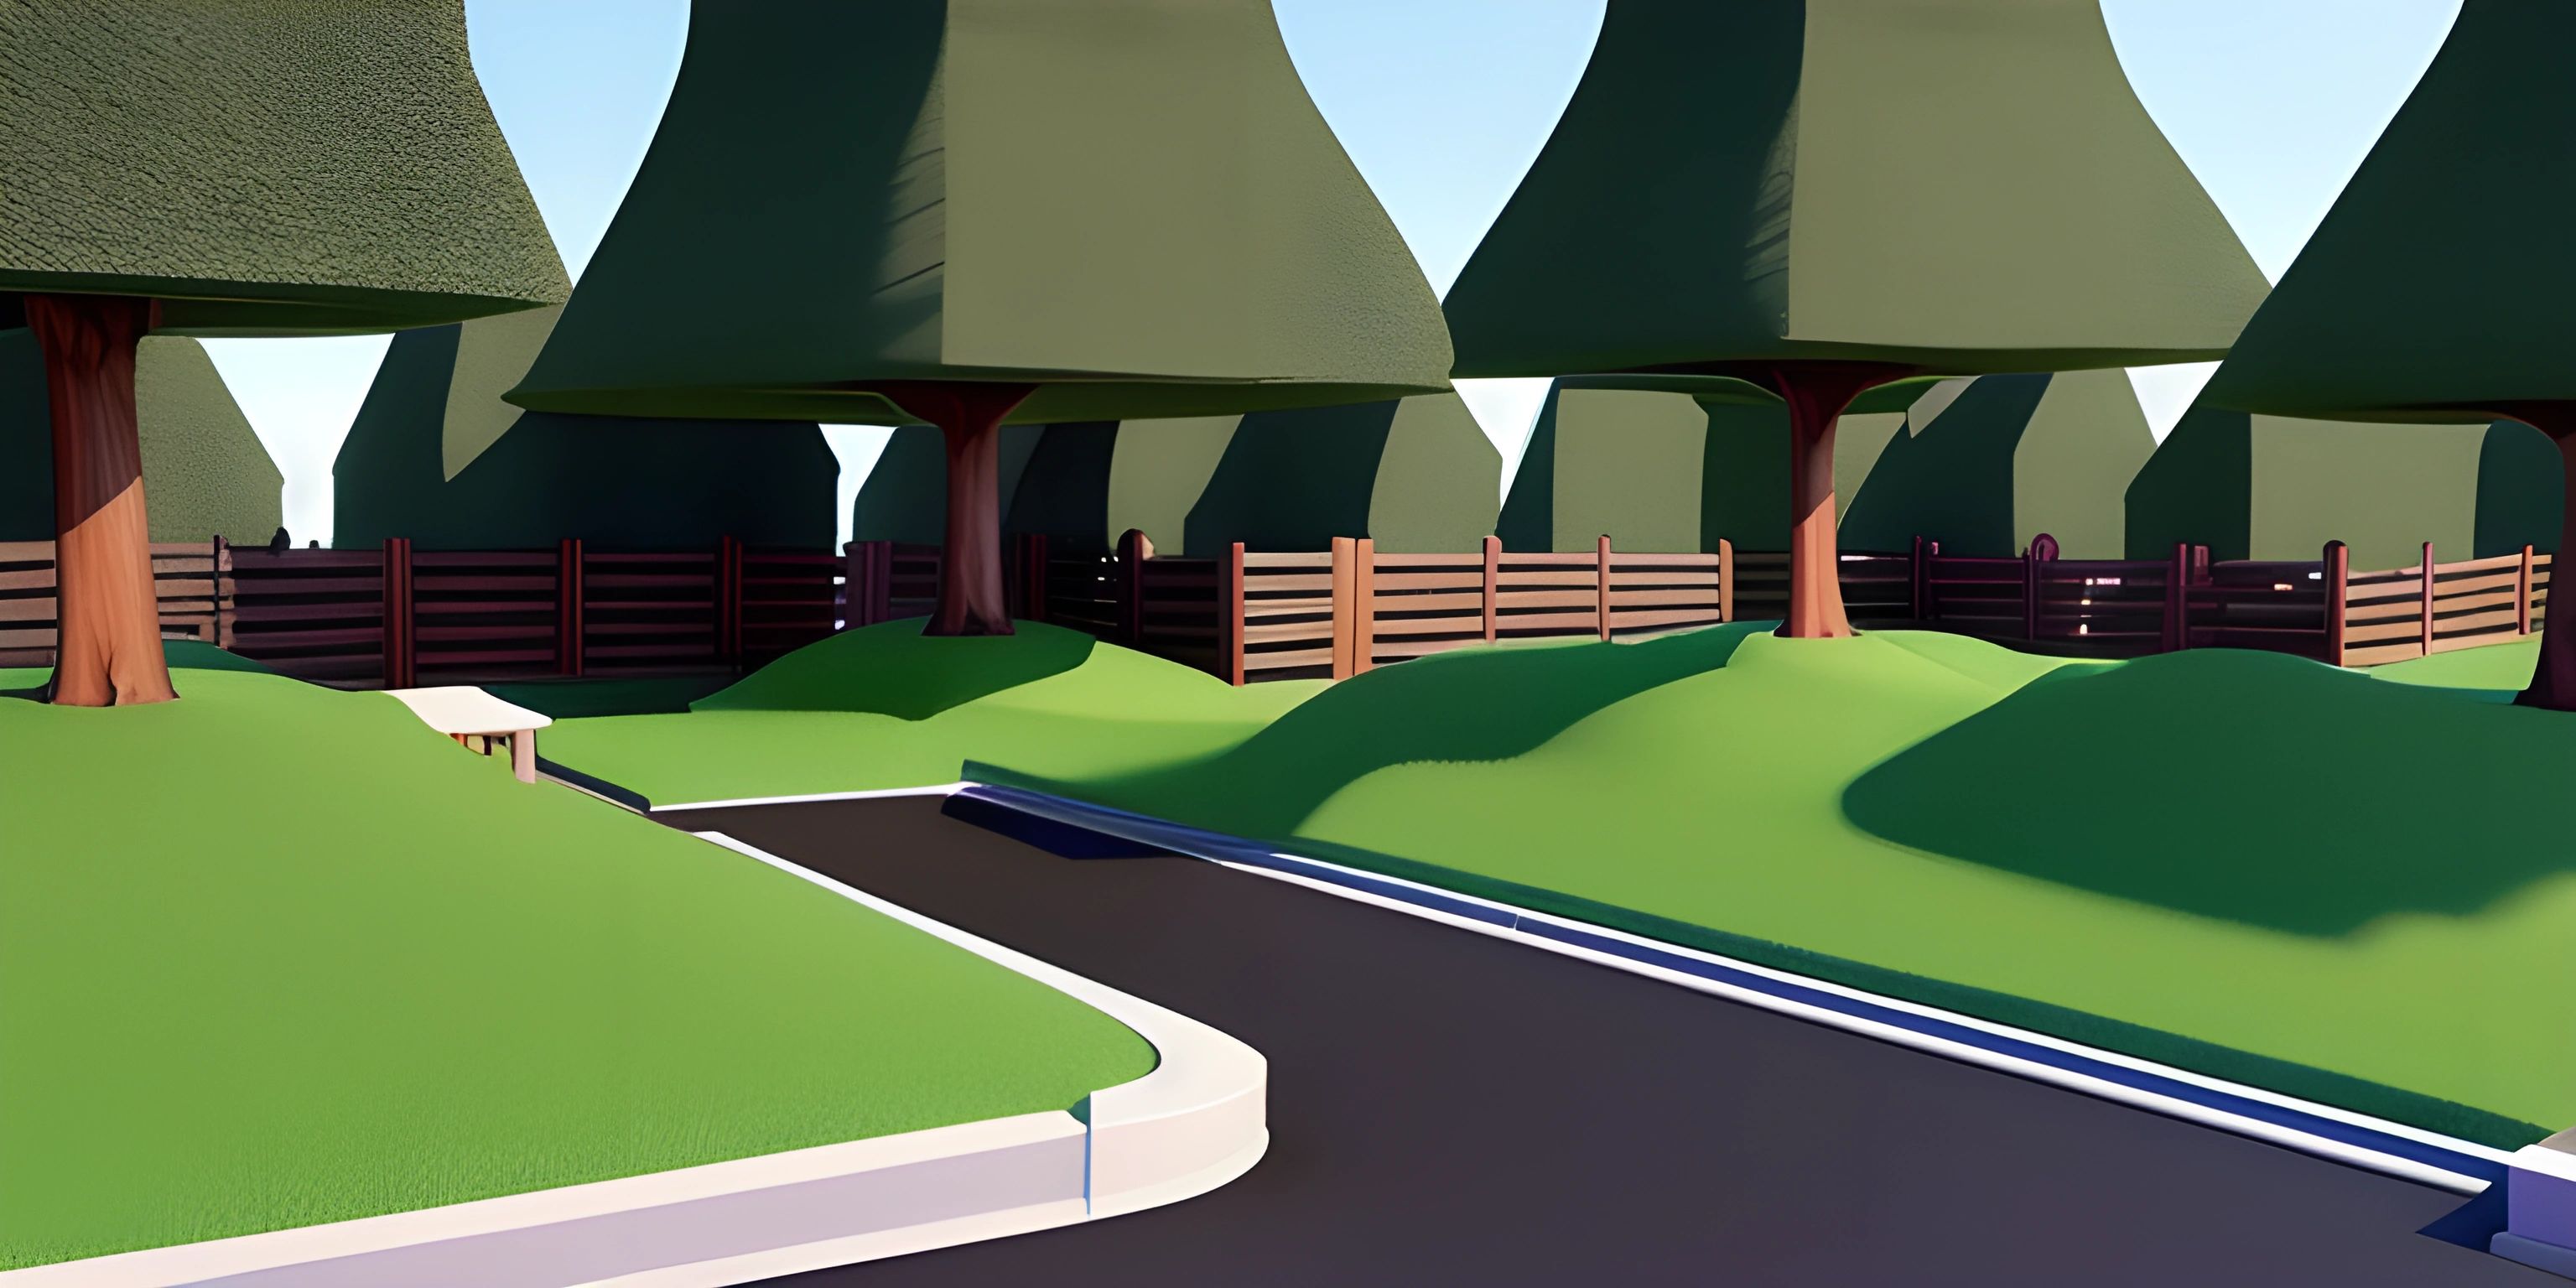 a cartoon, stylized road running through the woods in a game like environment with a few trees and grass